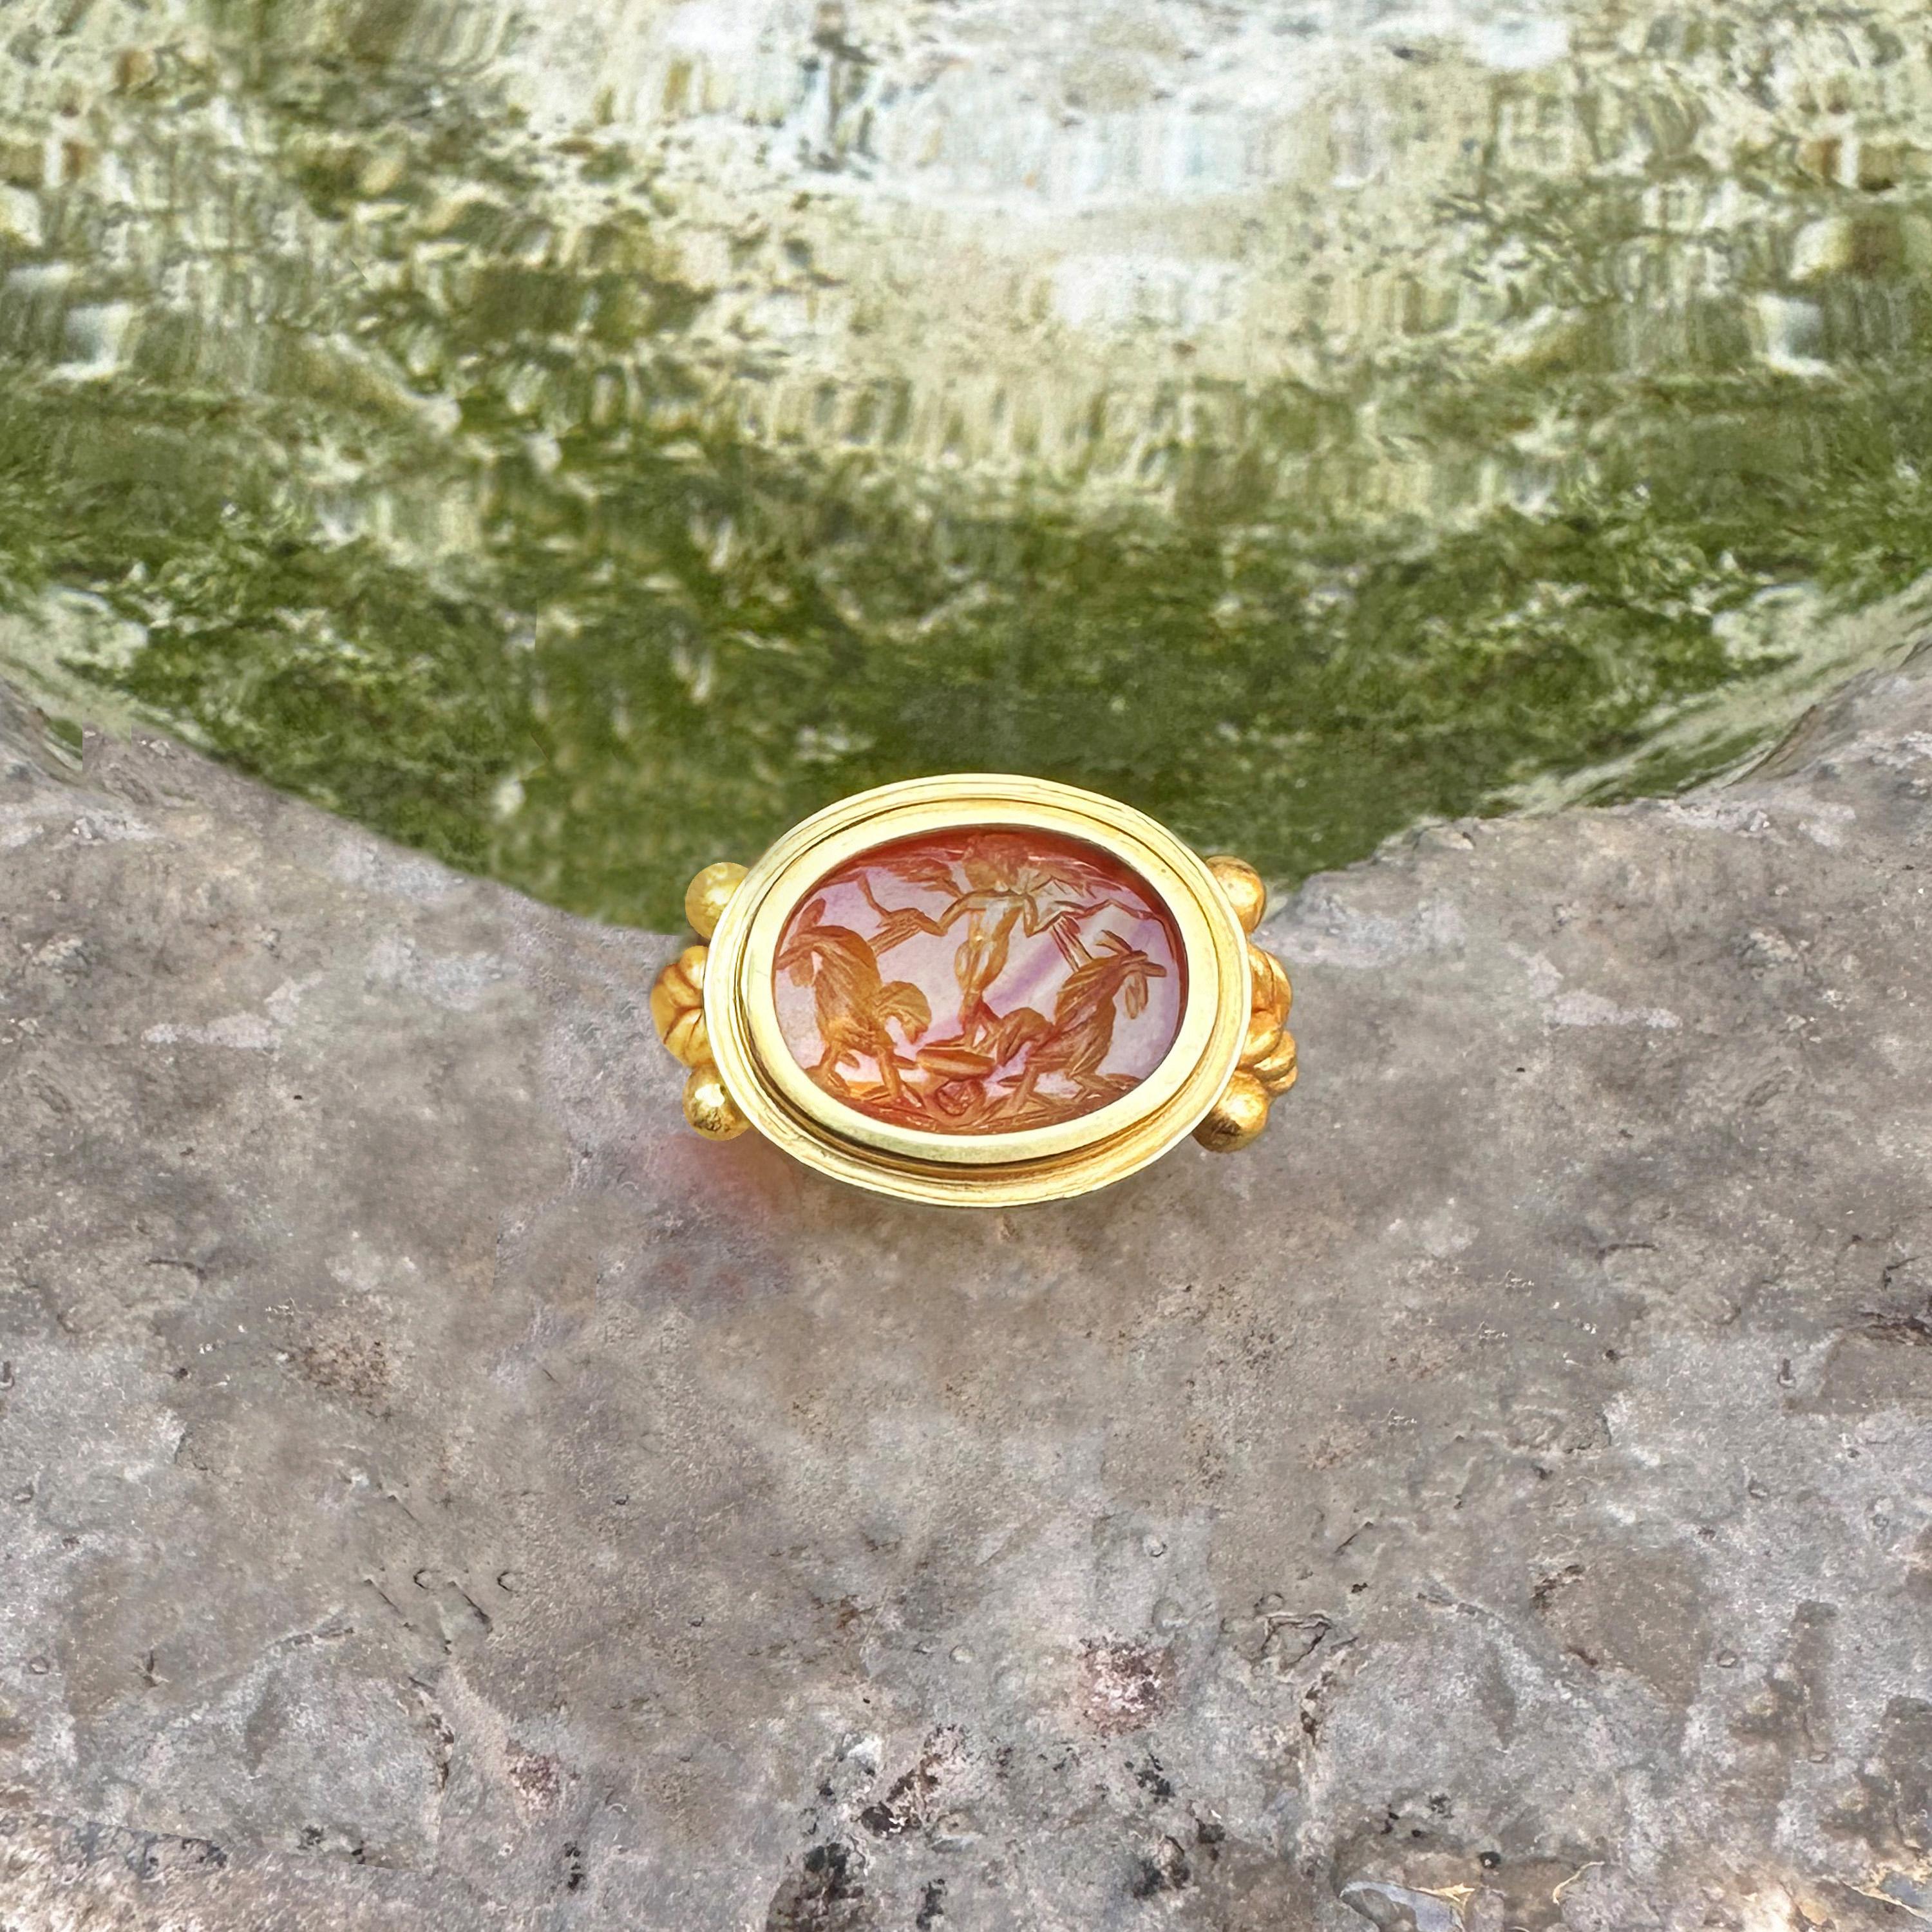 Ancient Roman Carnelian Intaglio 18Kt Gold Ring depicting God Eros and roosters For Sale 2